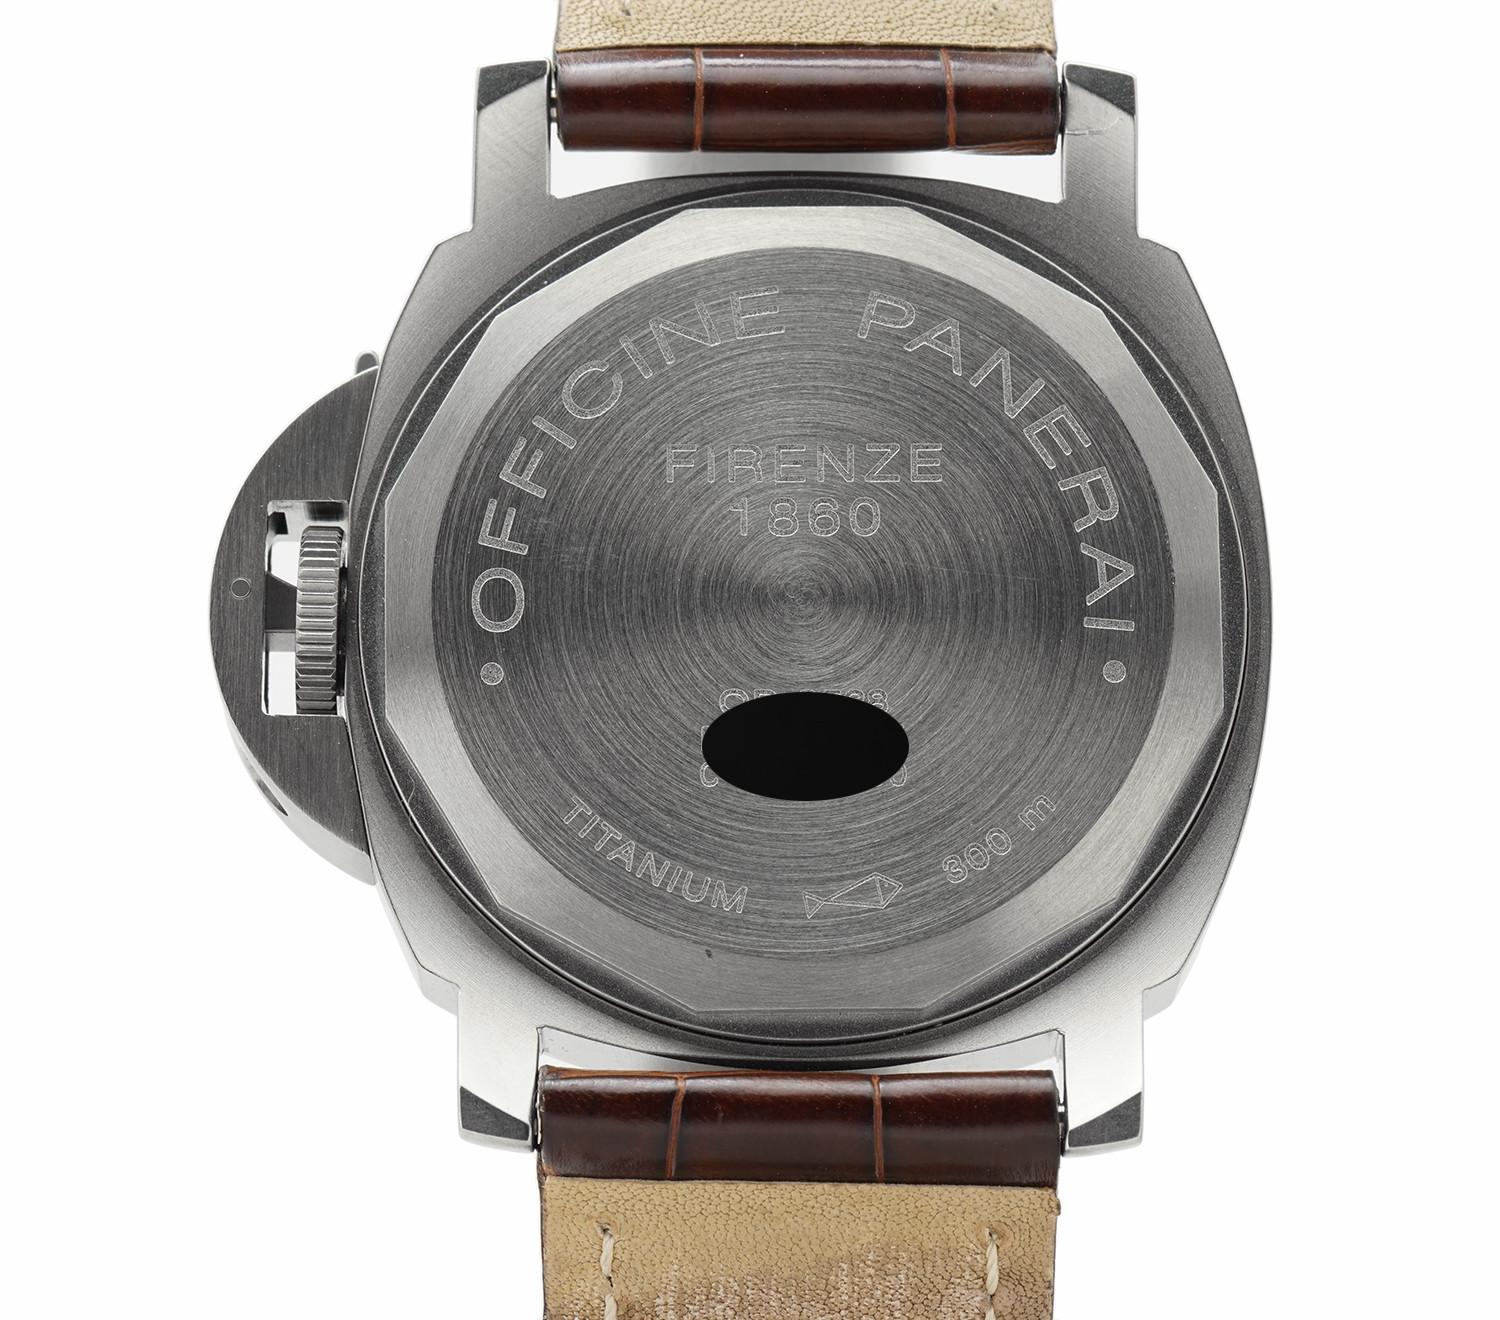 Contemporary Panerai Luminor PAM00057, Brown Dial, Certified and Warranty